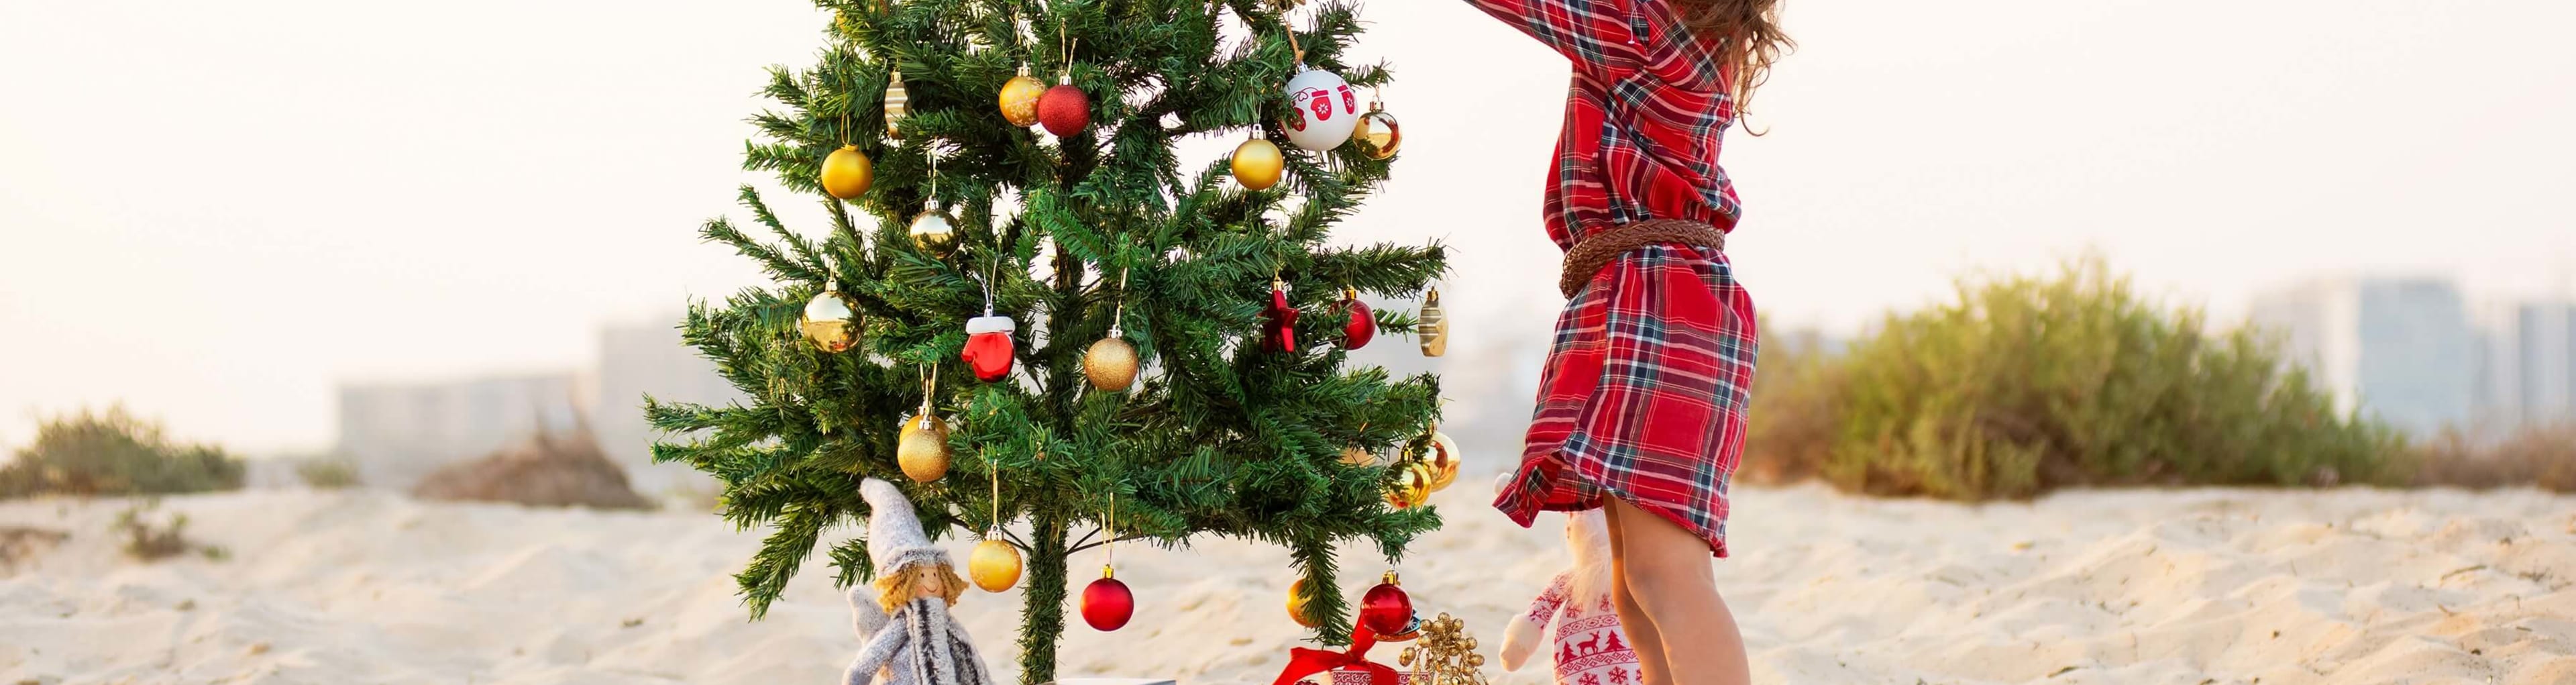 A child decorates a Christmas tree on the beach